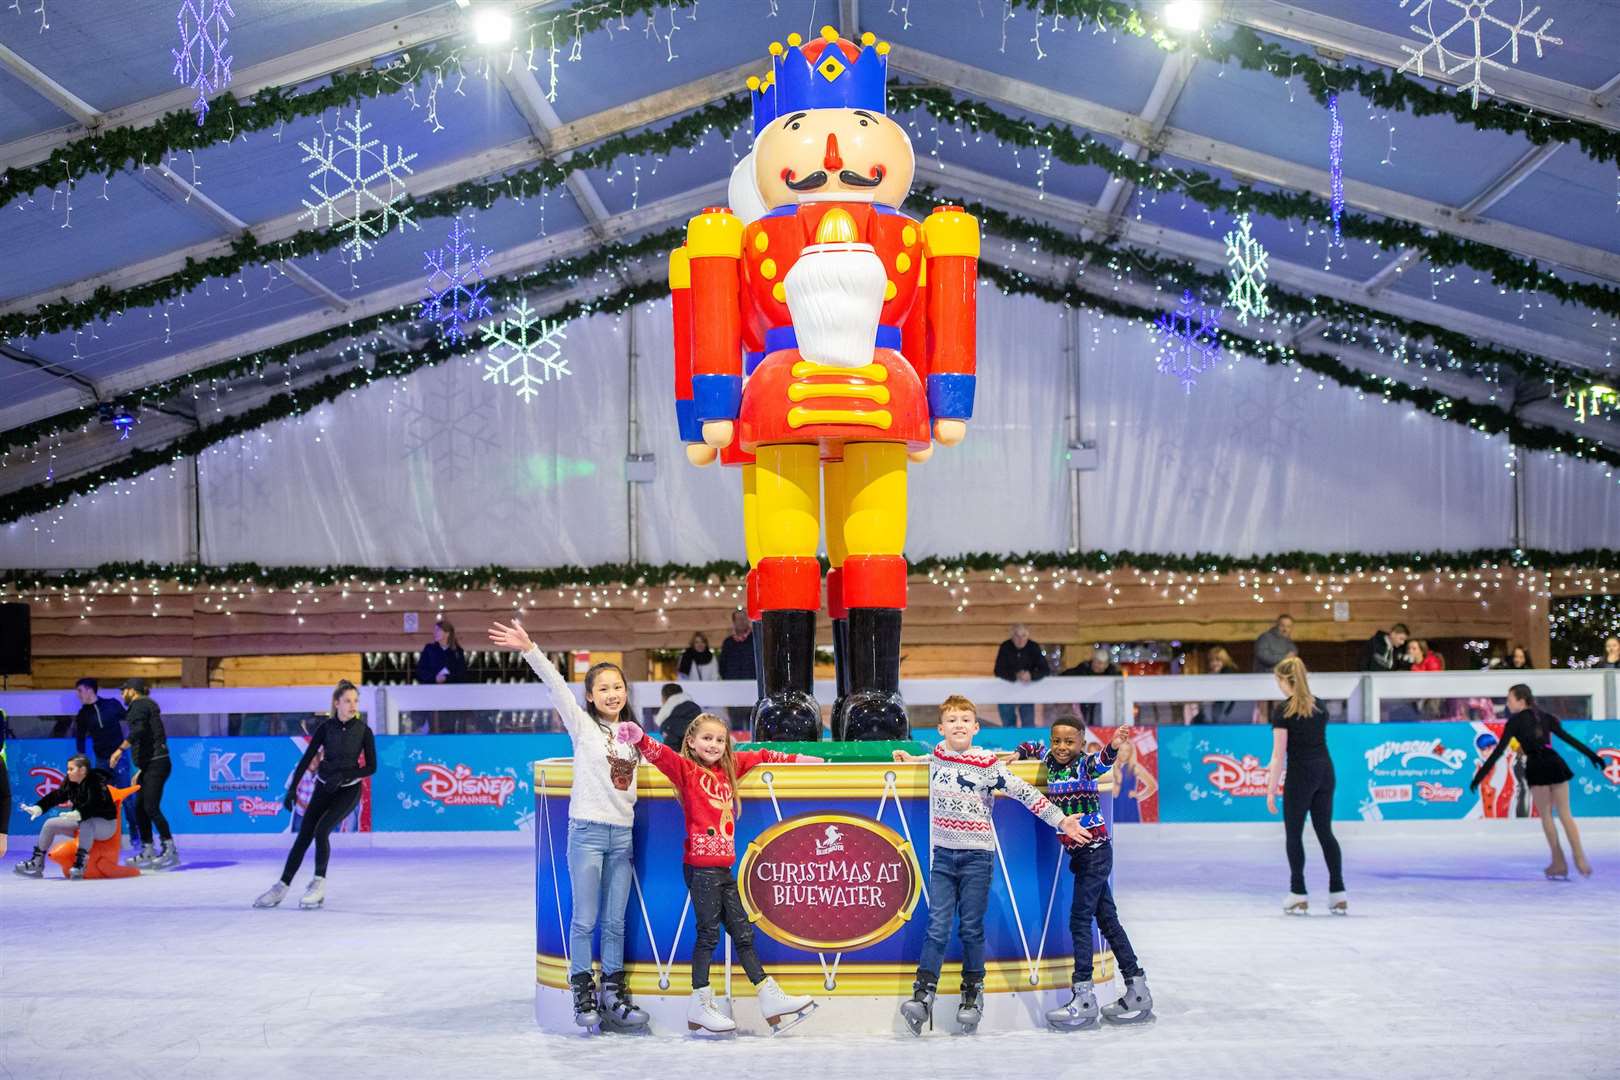 Tickets for the ice rink are now on sale